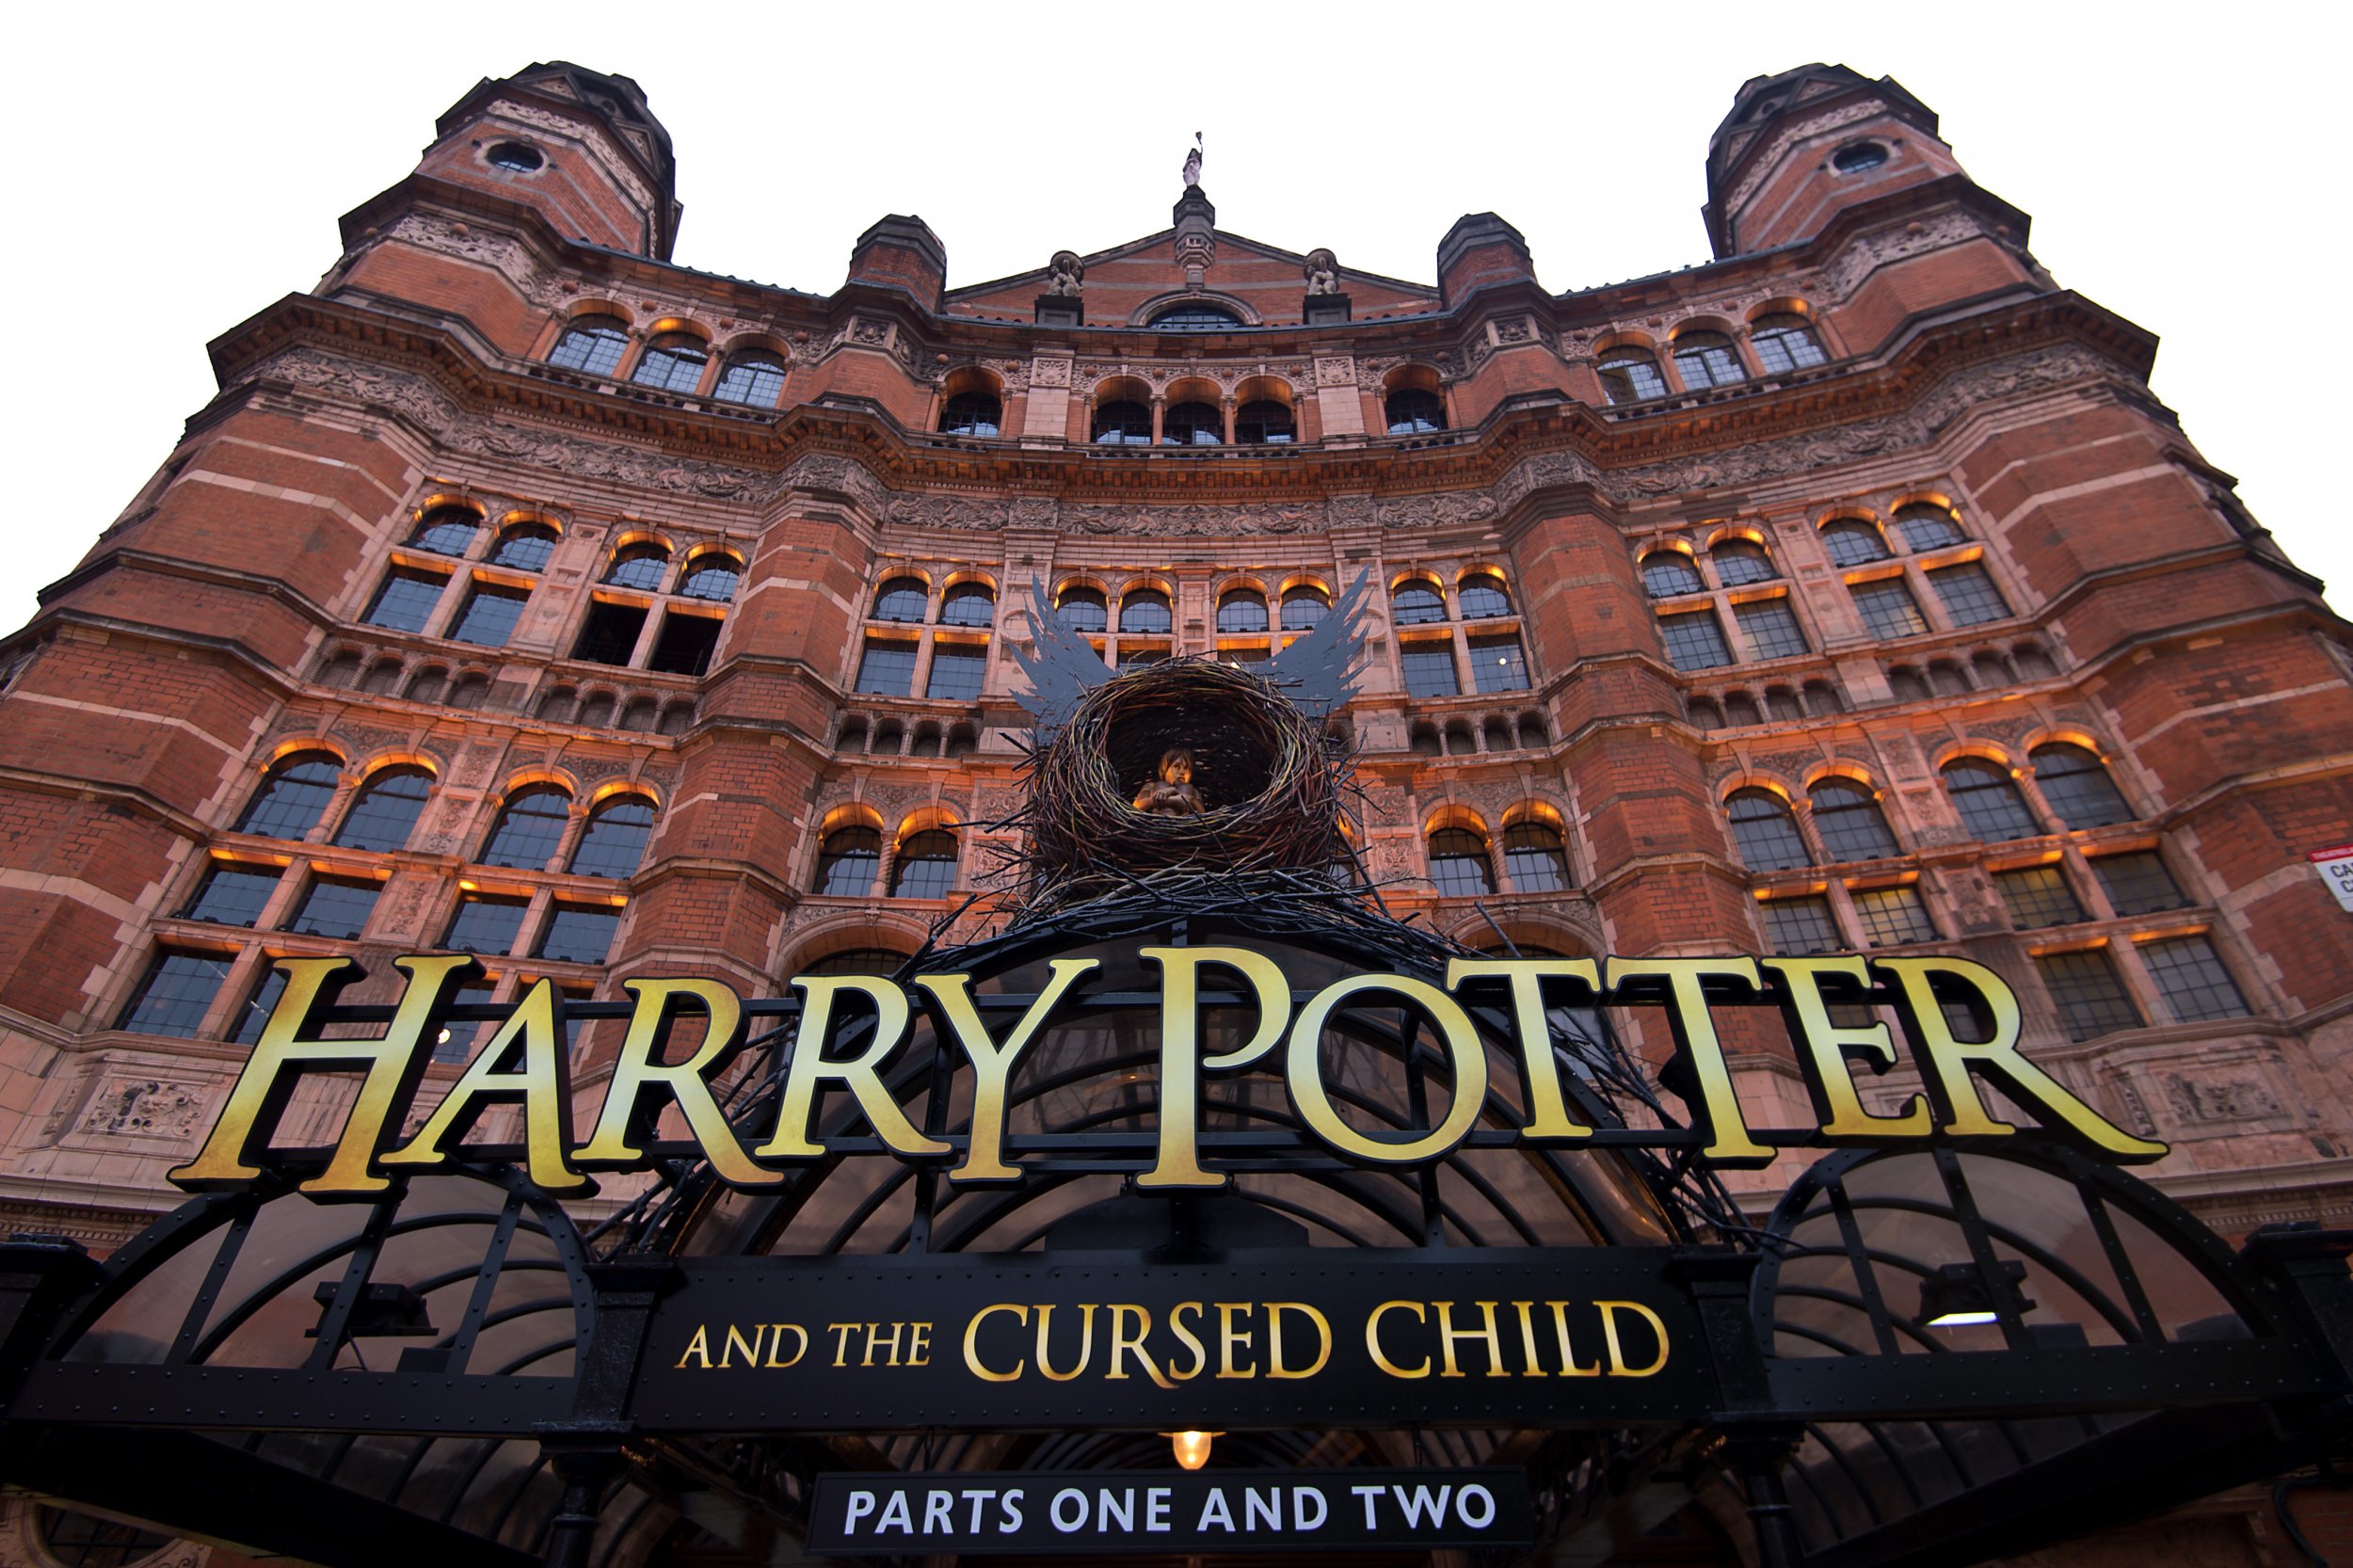 Harry Potter and the Cursed Child at The Palace Theatre